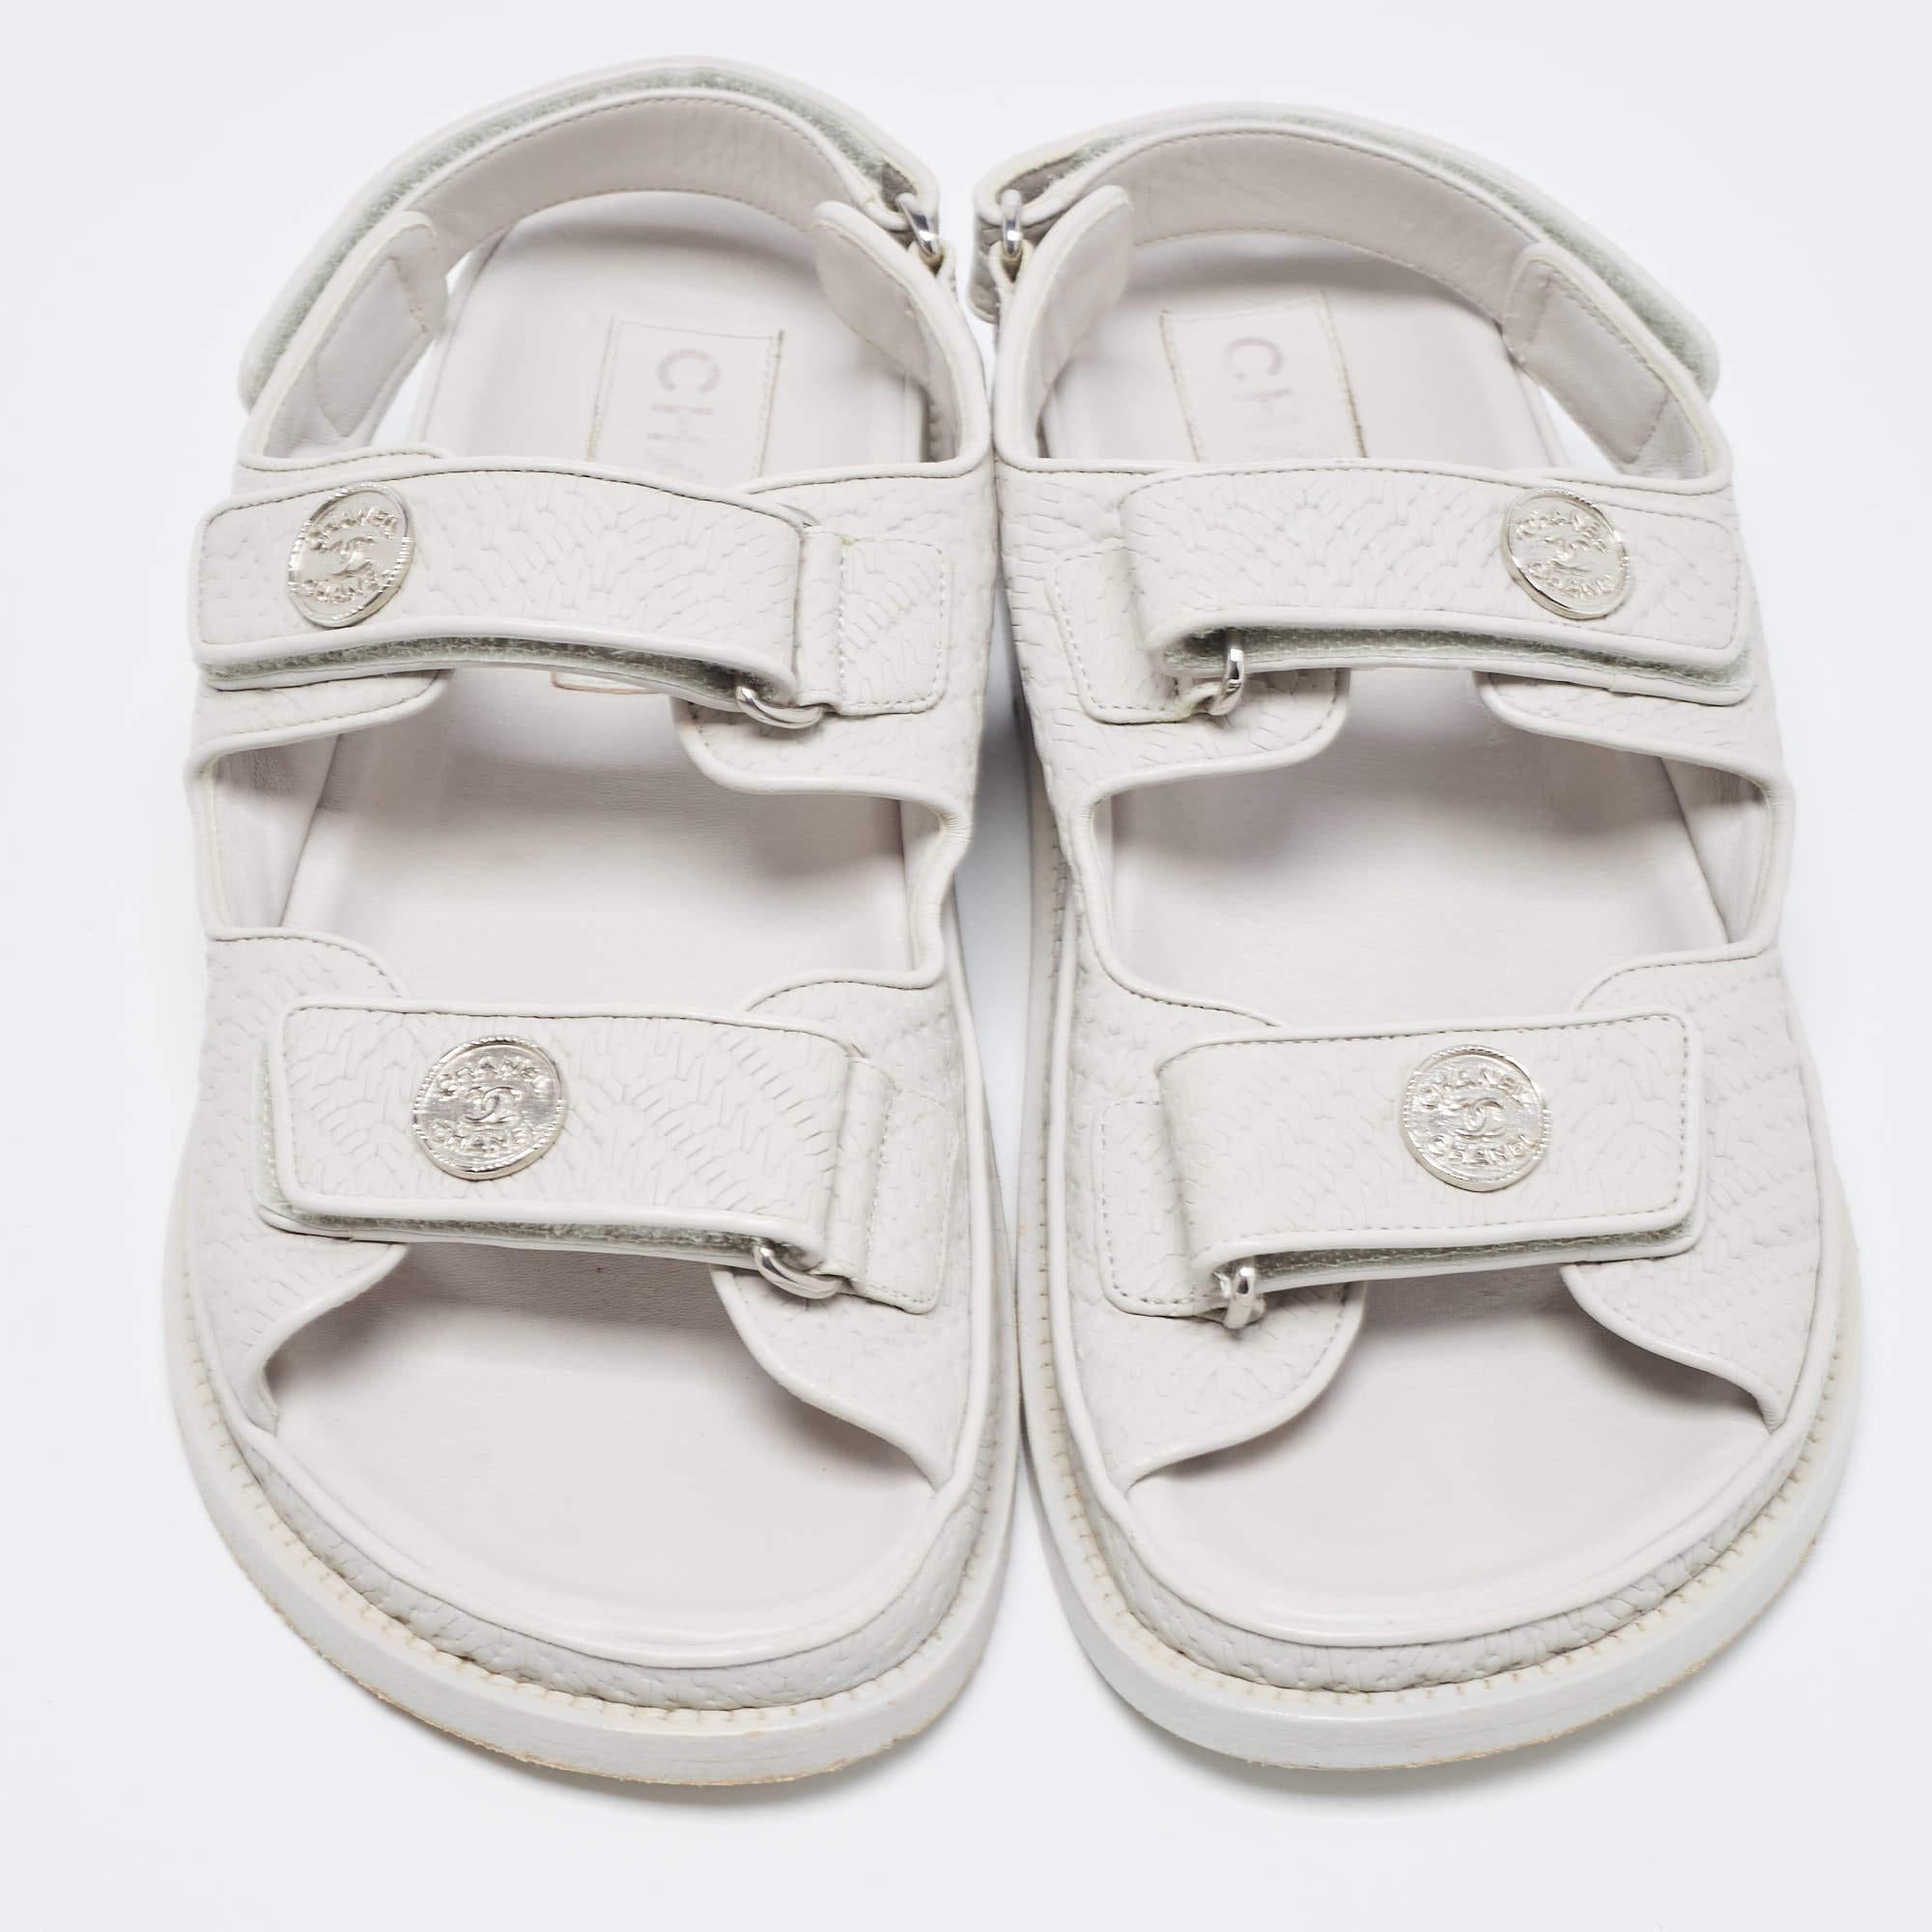 Let this comfortable pair be your first choice when you're out for a long day. These Chanel Dad sandals have well-sewn uppers beautifully set on durable soles.

